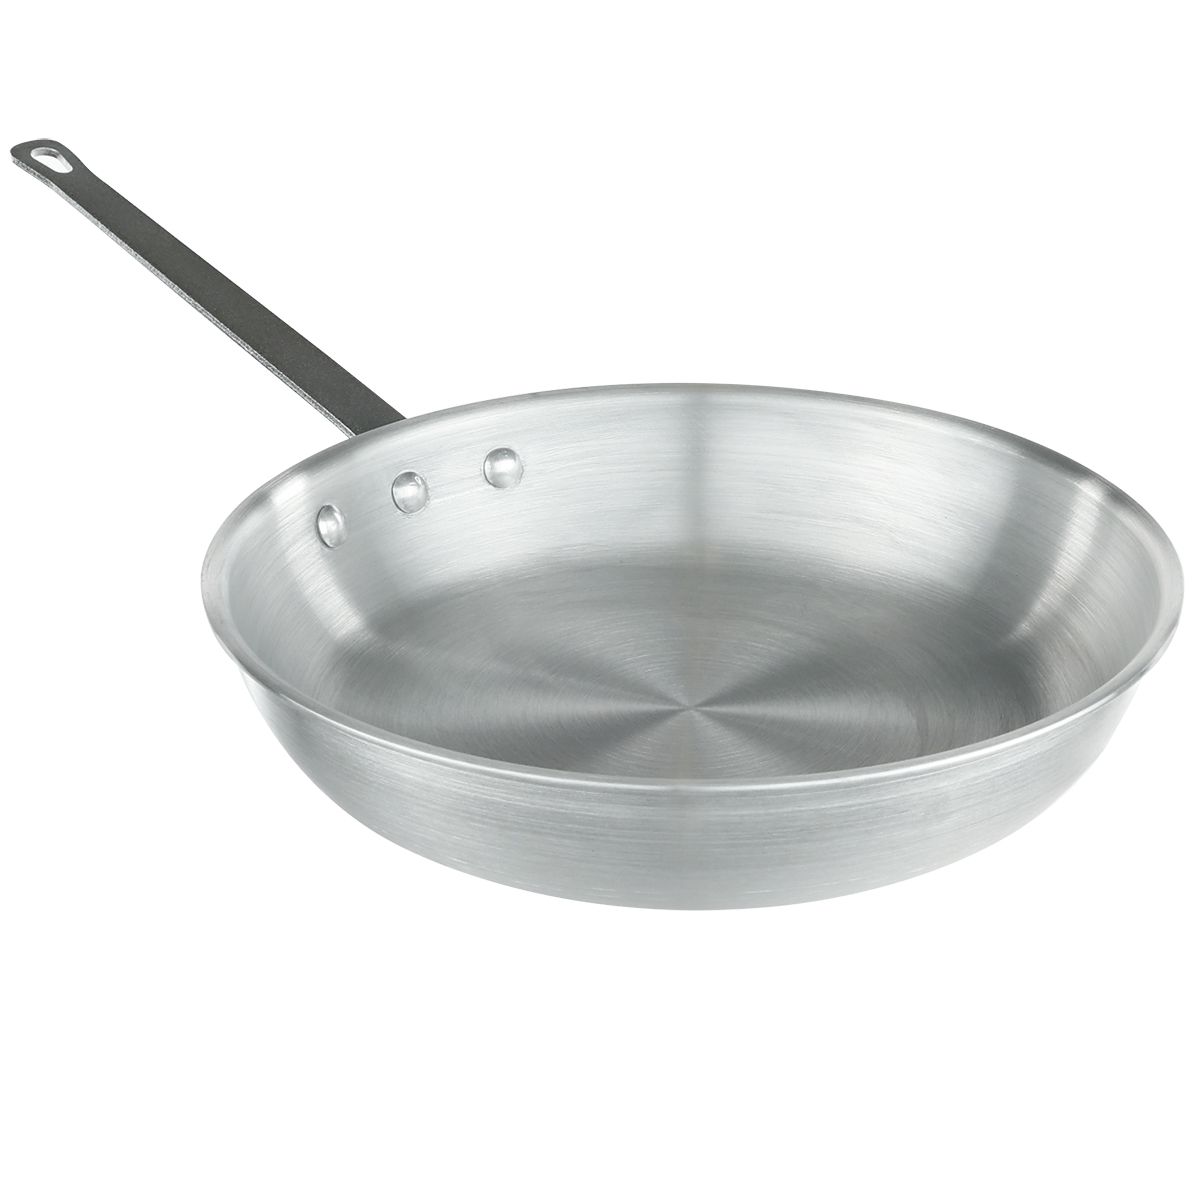 https://static.restaurantsupply.com/media/catalog/product/cache/58705eee992a0d7bab305099af29f9ee/c/h/chef-approved-224322-12-aluminum-fry-pan-with-natural-finish_1.jpg